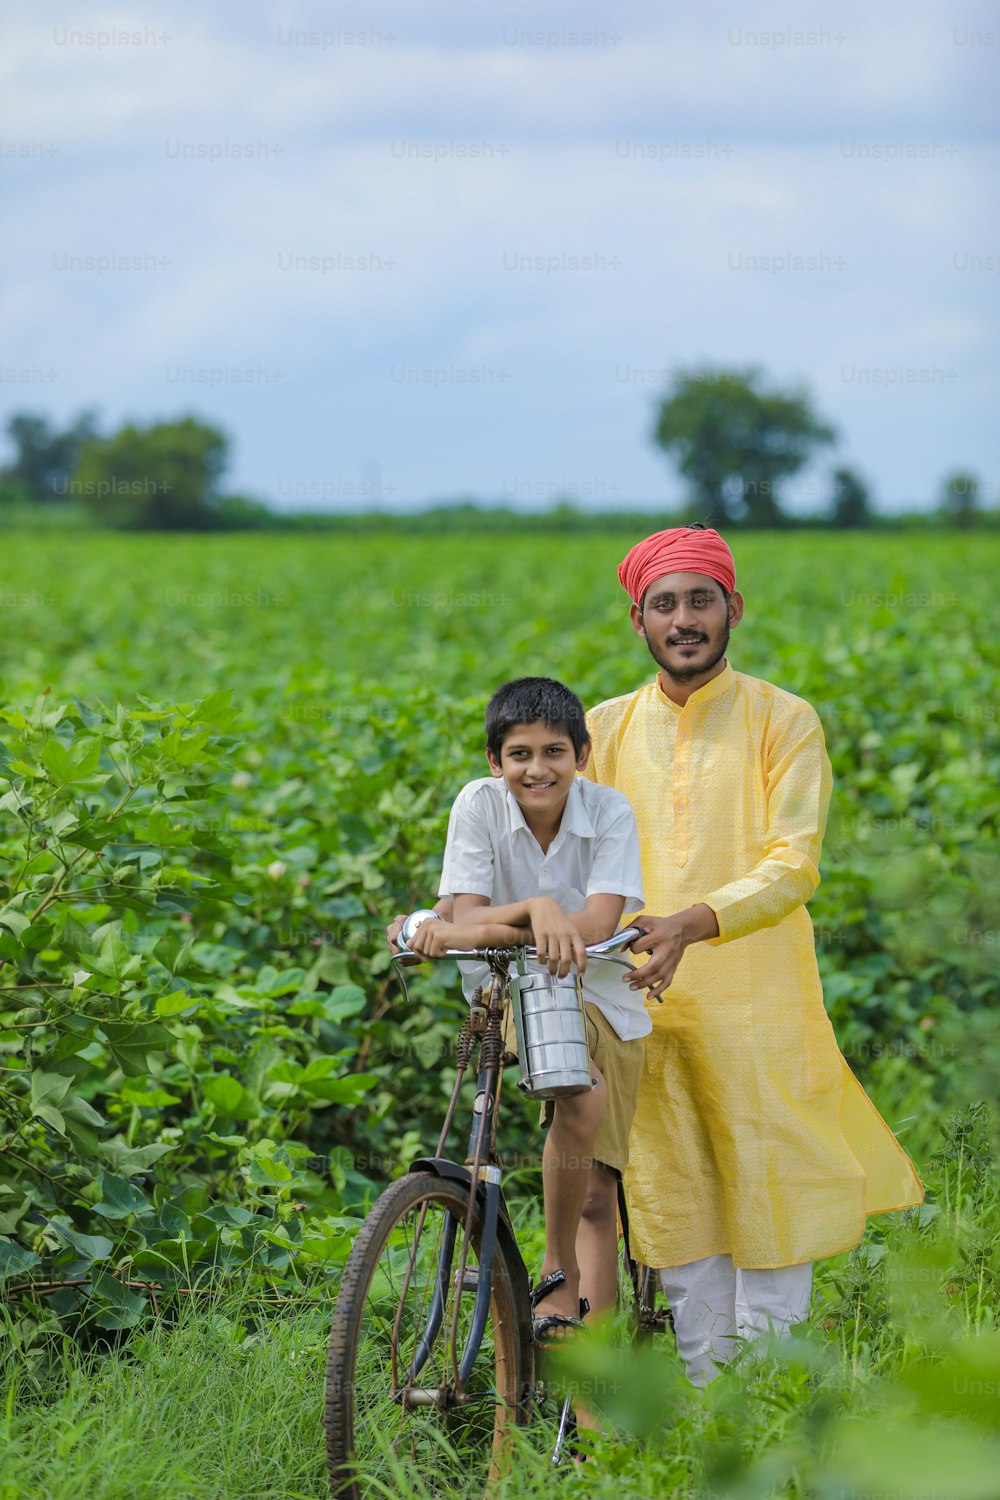 Indian farmer or labor with his child at cotton field